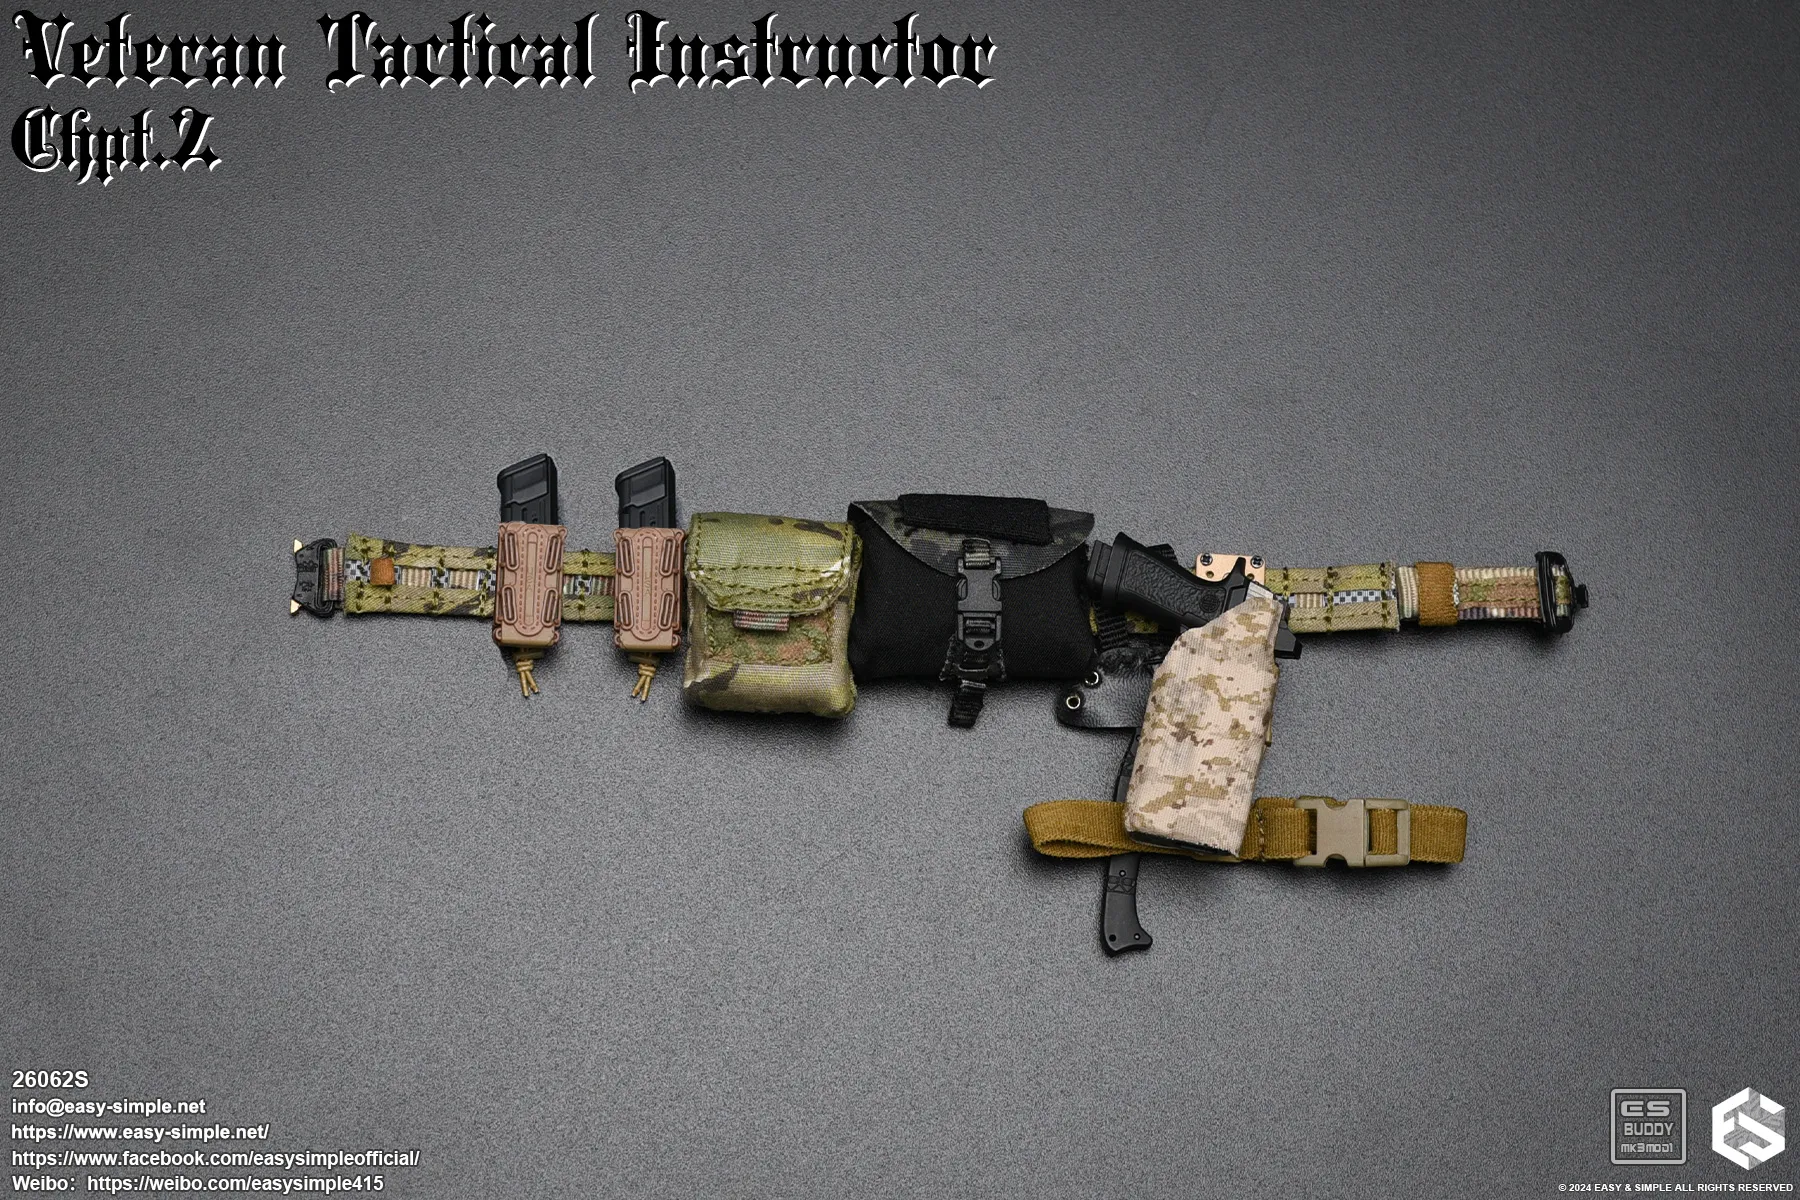 instructor - NEW PRODUCT: Easy & Simple Veteran Tactical Instructor Chapter II 26062S Format,webp